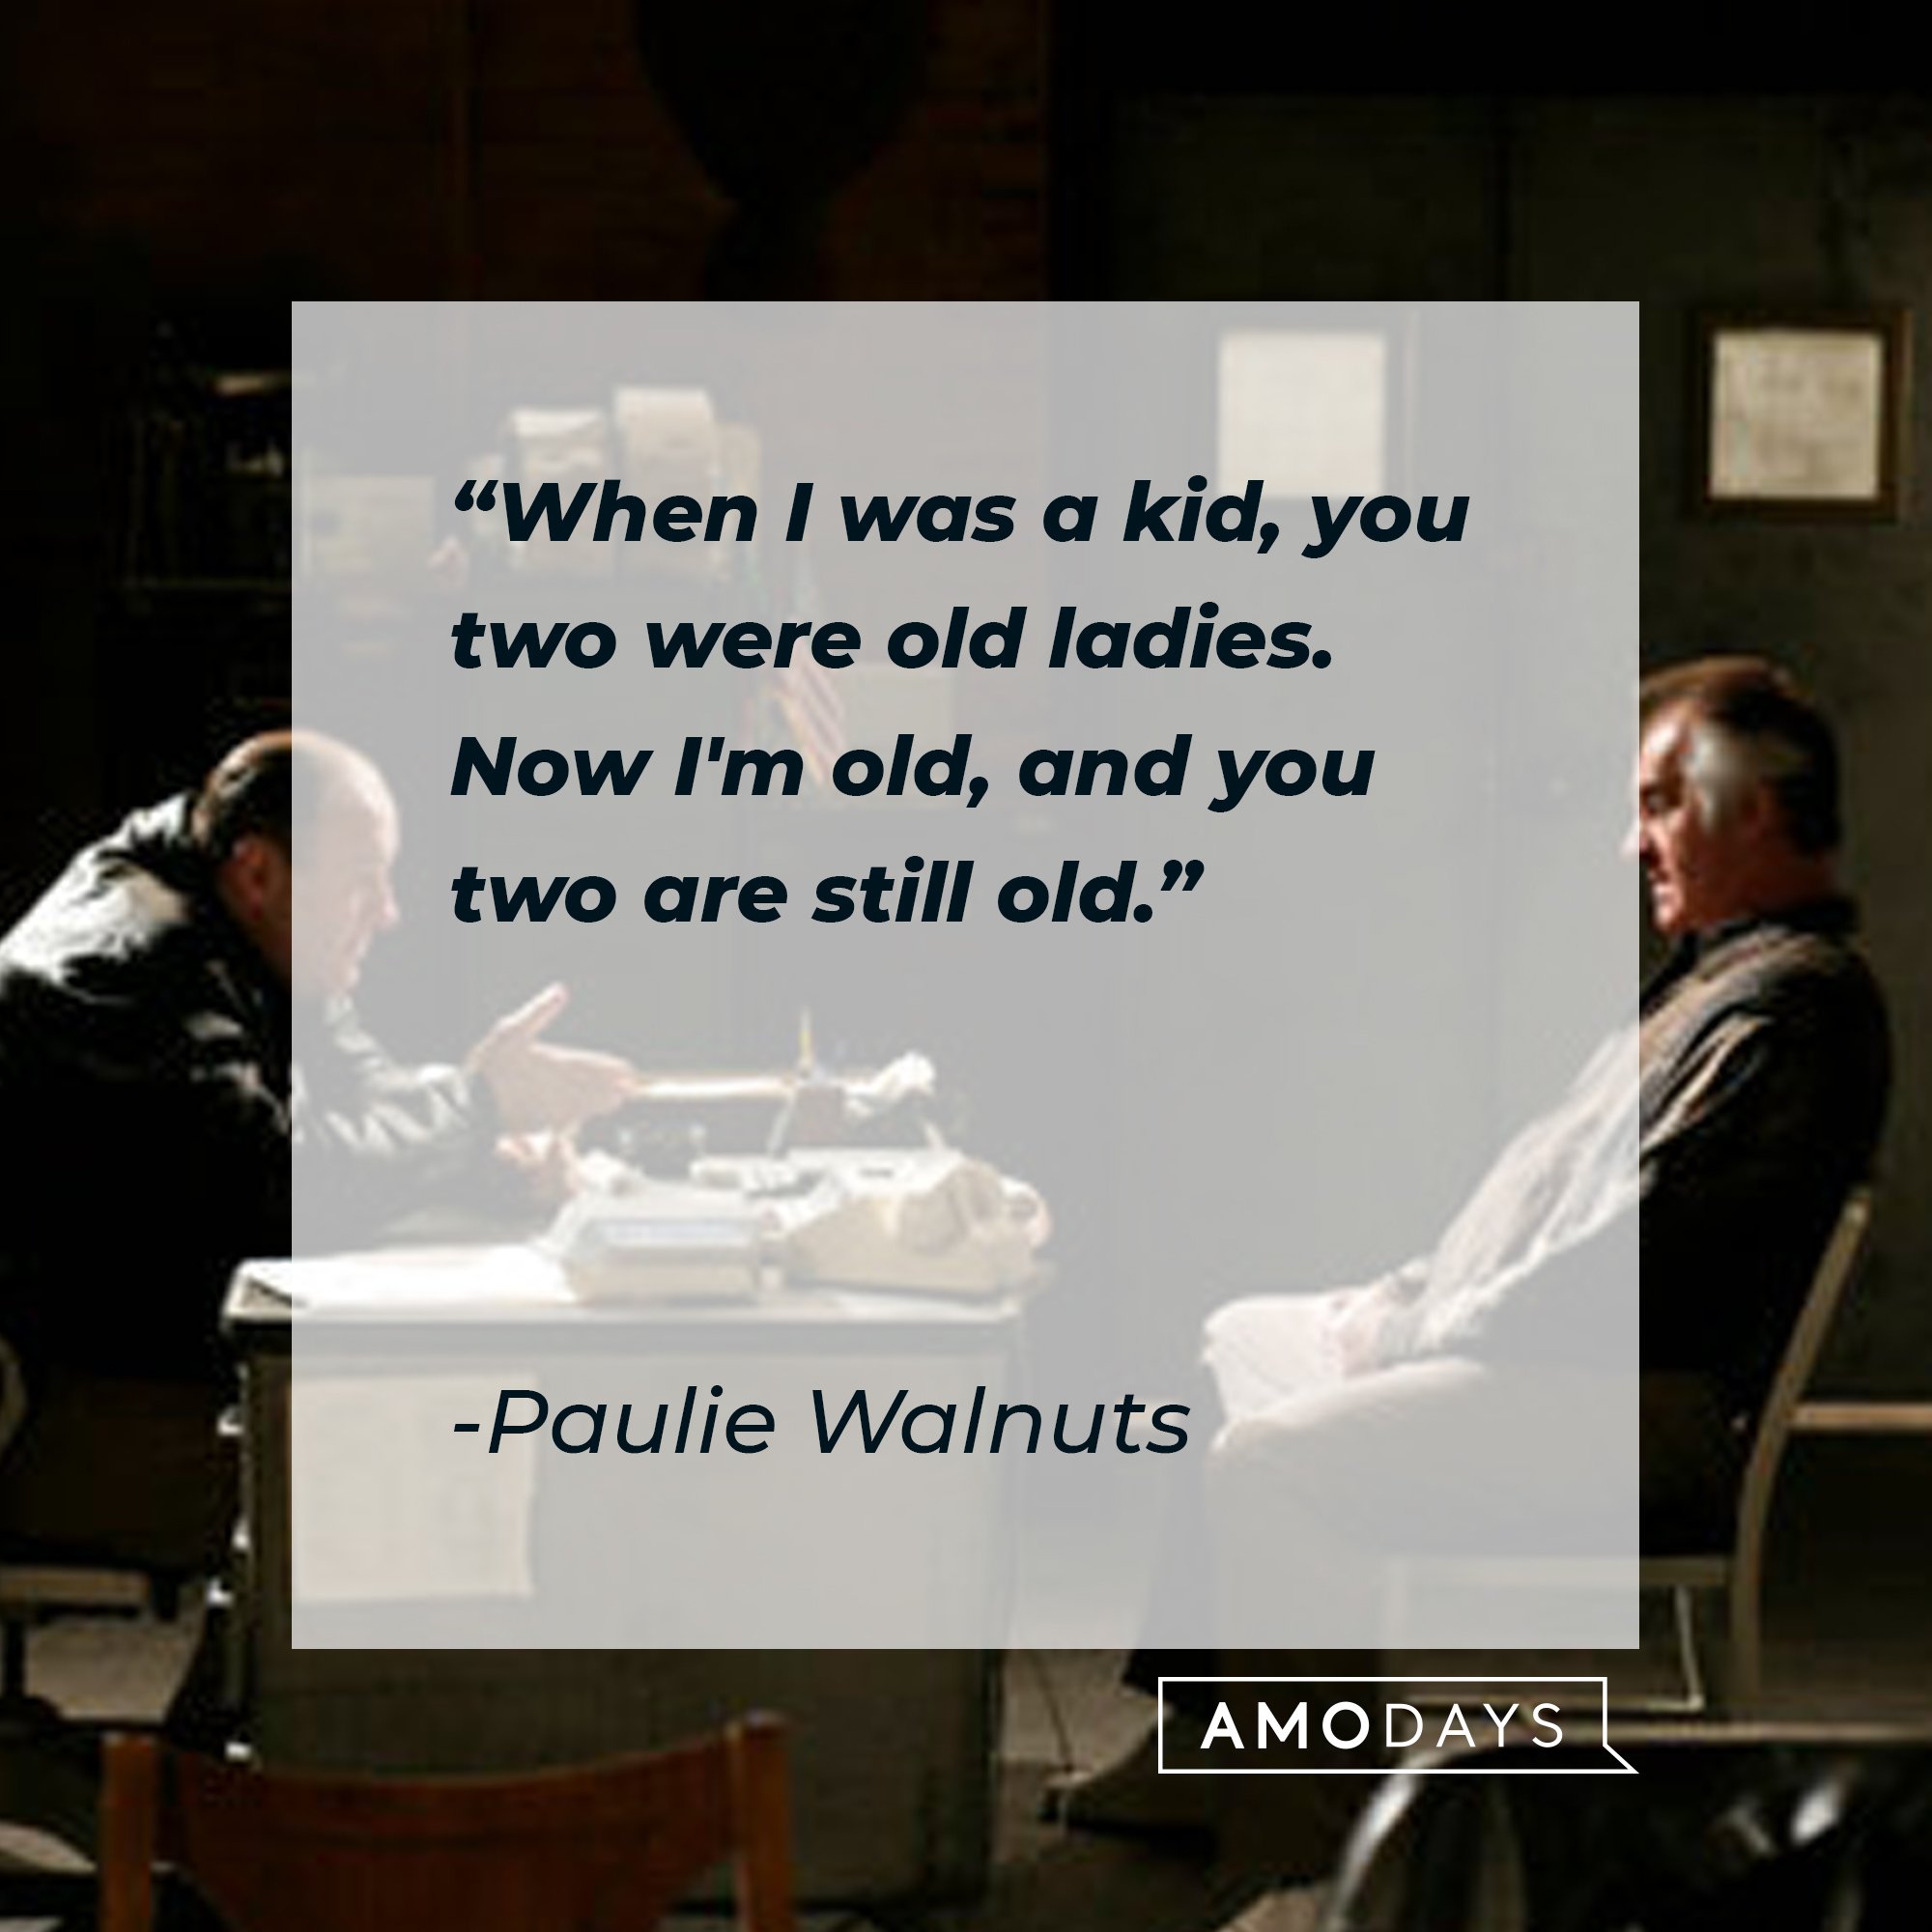 Paulie Walnuts' quote: "When I was a kid, you two were old ladies. Now I'm old, and you two are still old." | Image: AmoDays 